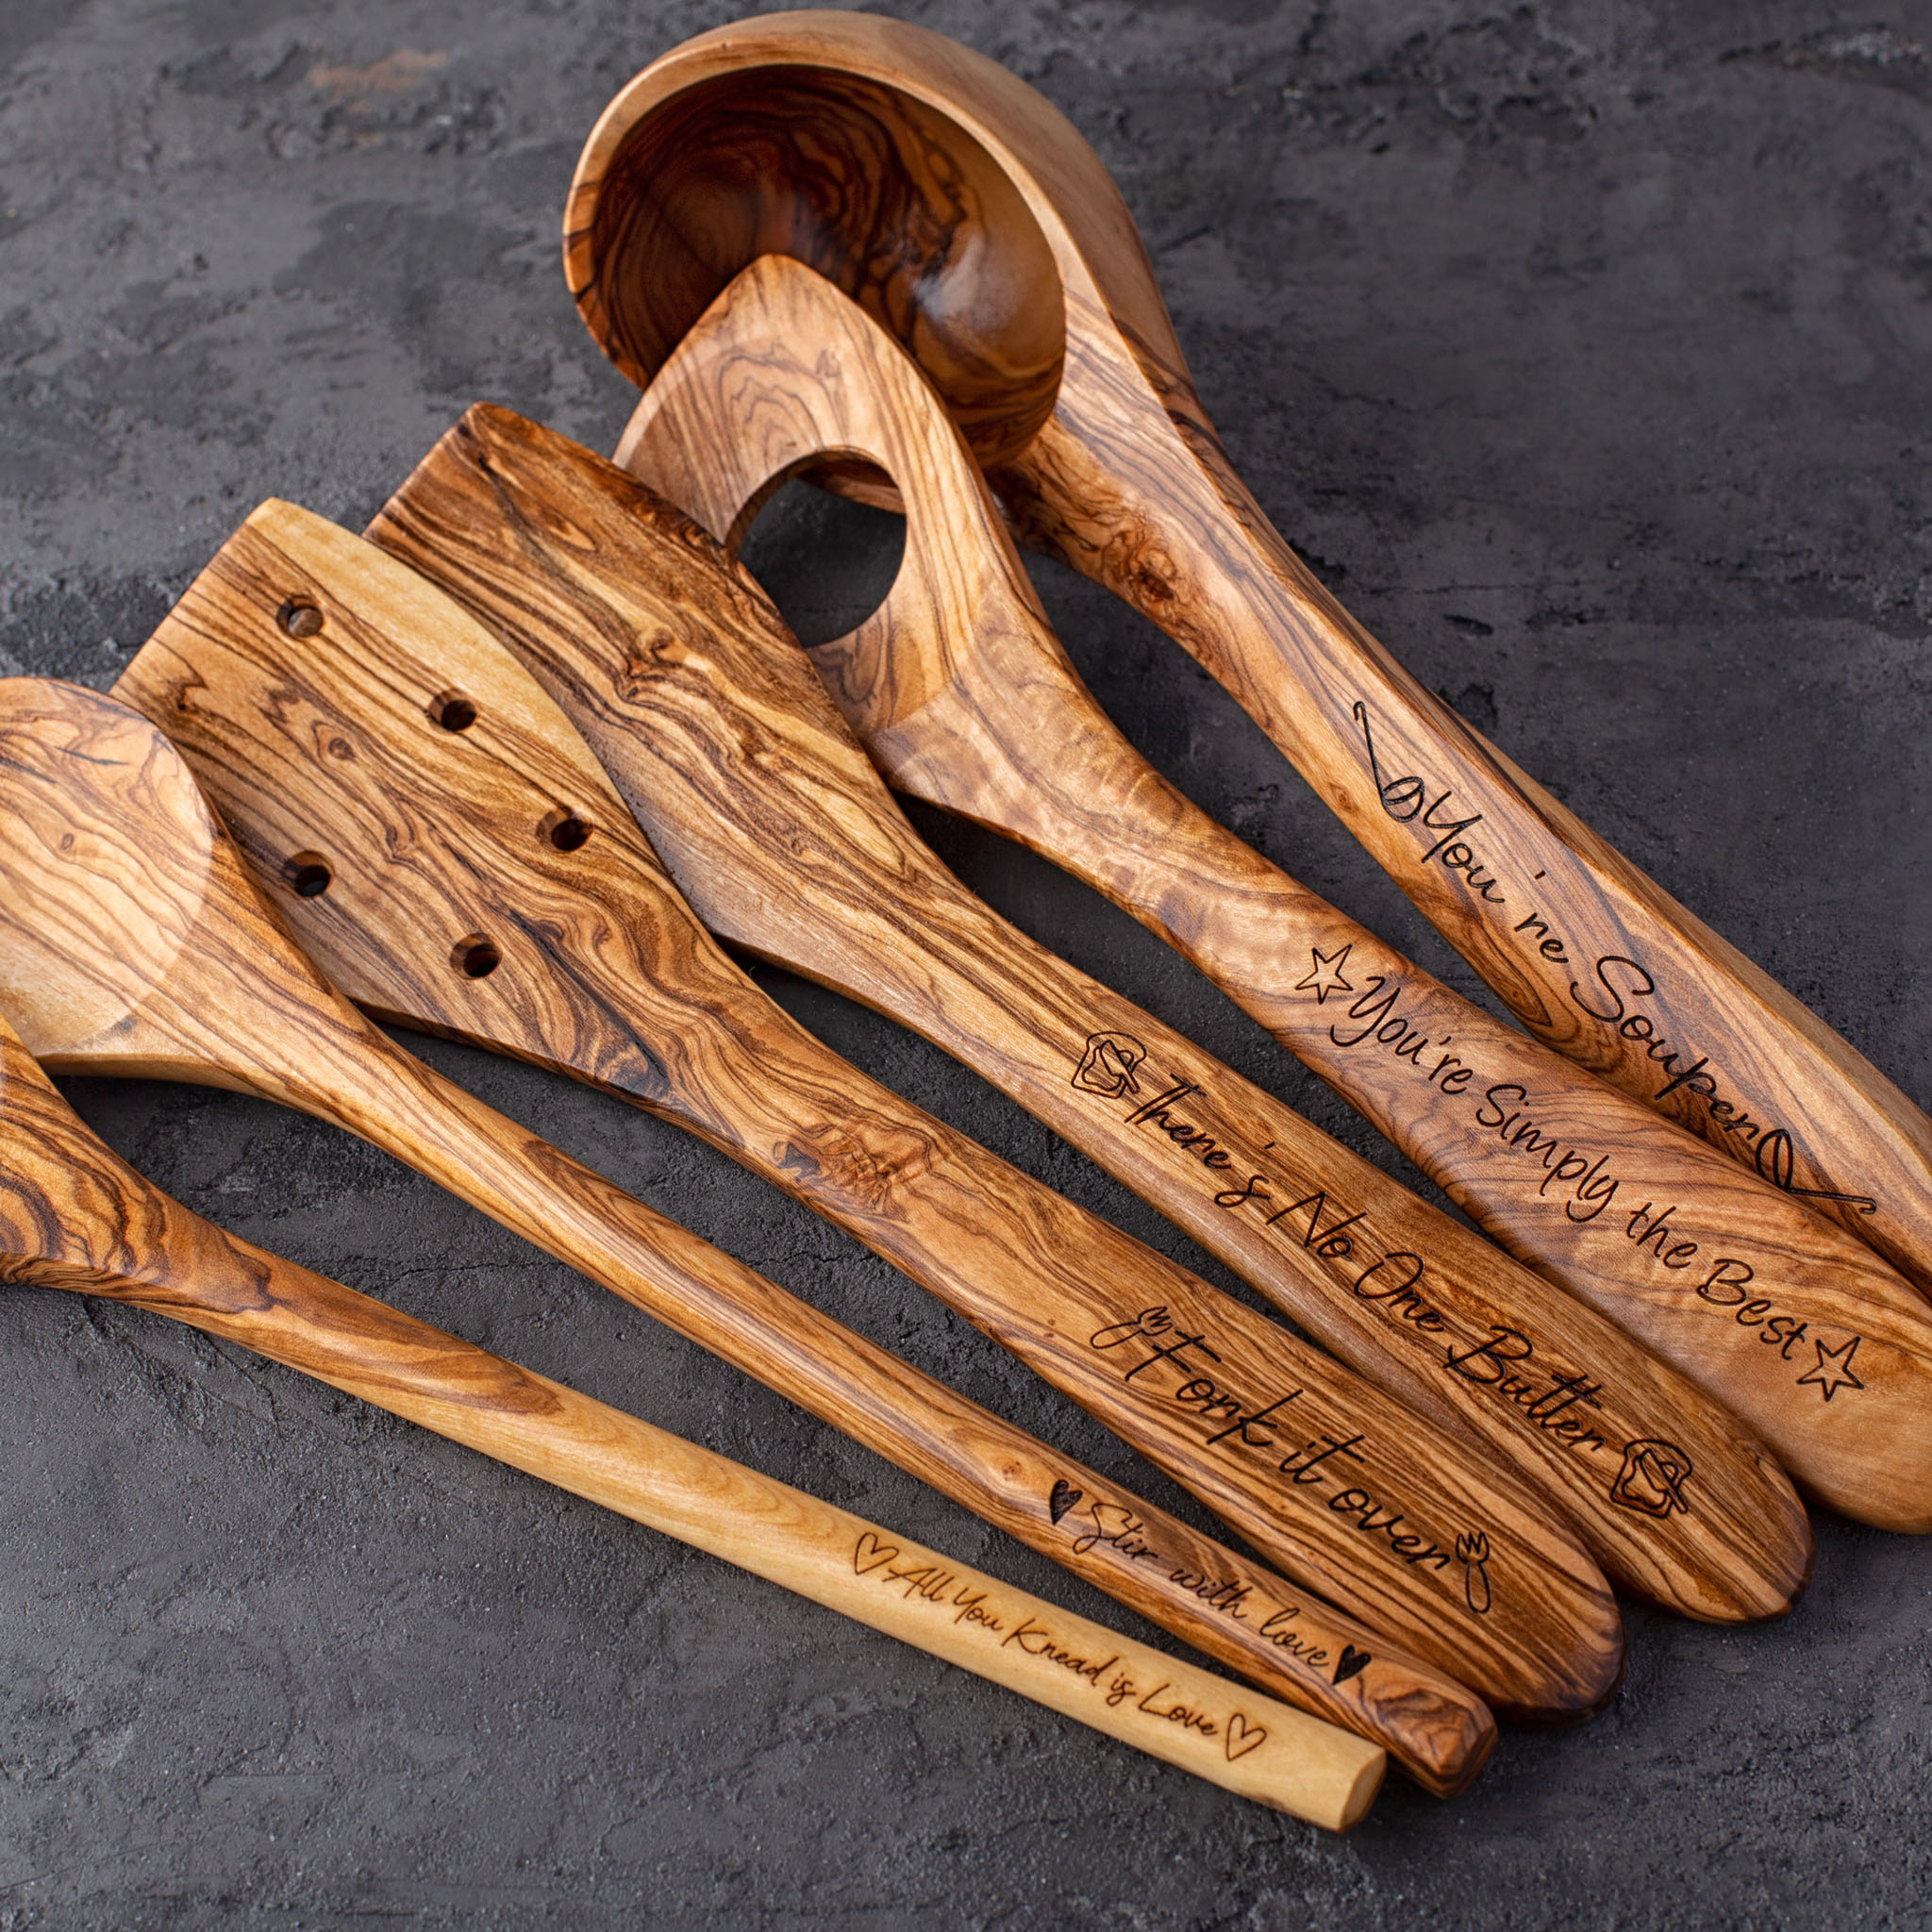 Personalised Cooking Utensil,engraving Wood Spatula Set,soup Ladle,wooden  Kitchen Utensil Set,best for Non Stick Pan,home Gifts,chef Gifts. 